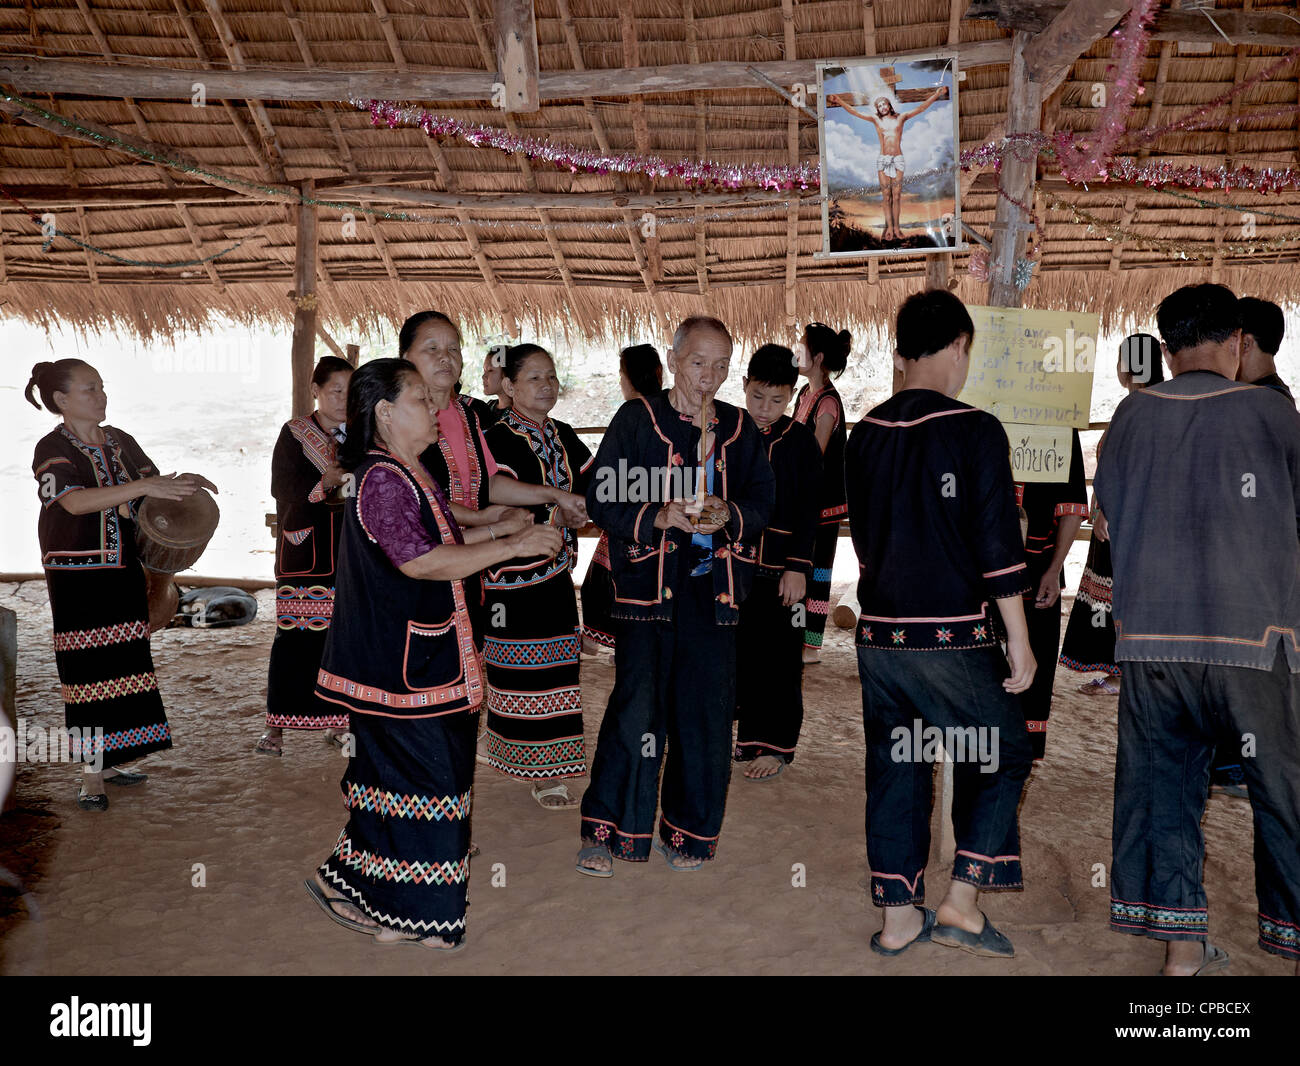 Lahu people of Thailand's Northern hilltribes. Christian in their believe and seen here worshiping Christ.  Chiang Rai province. Rural Thailand people Stock Photo